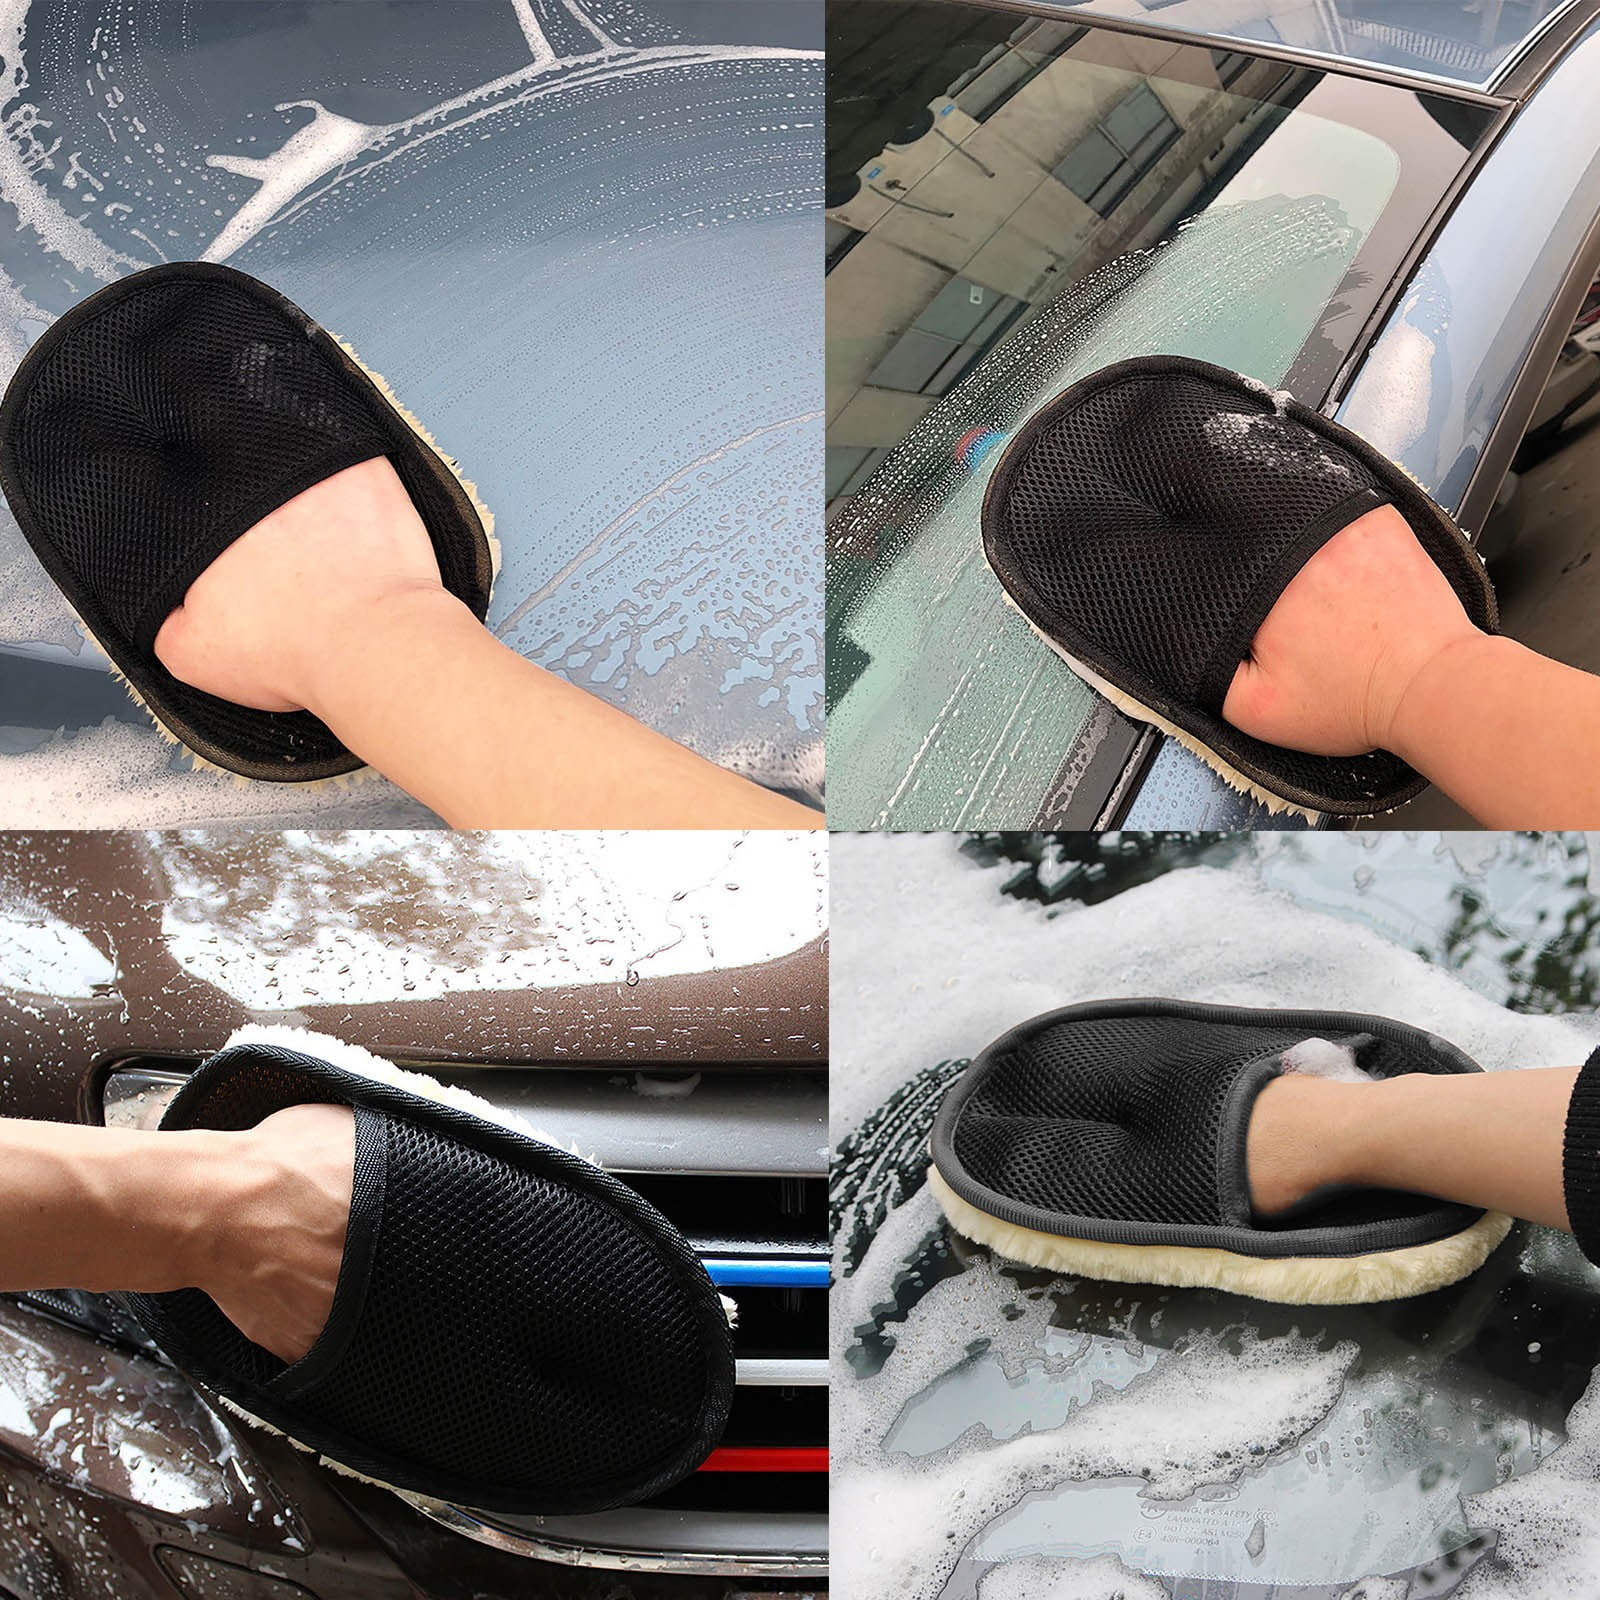 Clzoud Cleaning Supplies for Cars Interior Wool Wash Gloves Lint Scrubber High Density Microfiber Soft Automotive Polishing Black, Size: One Size